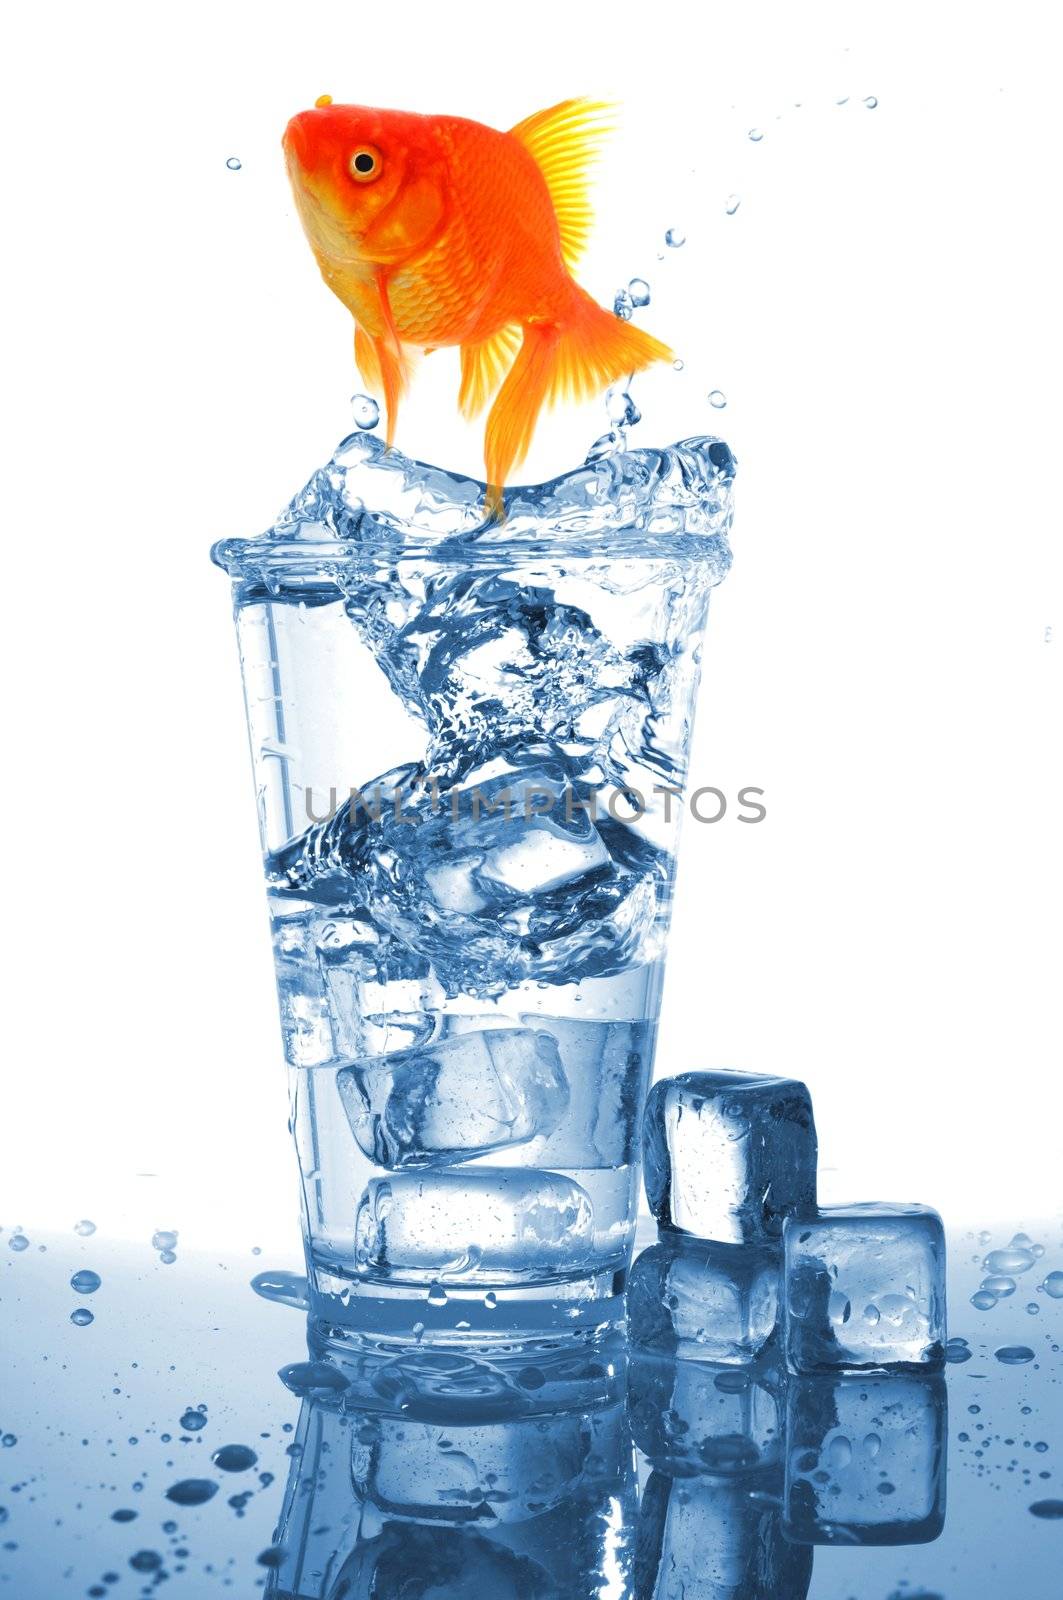 goldfish in cocktail drink glass and water showing bar flee free or jail concept